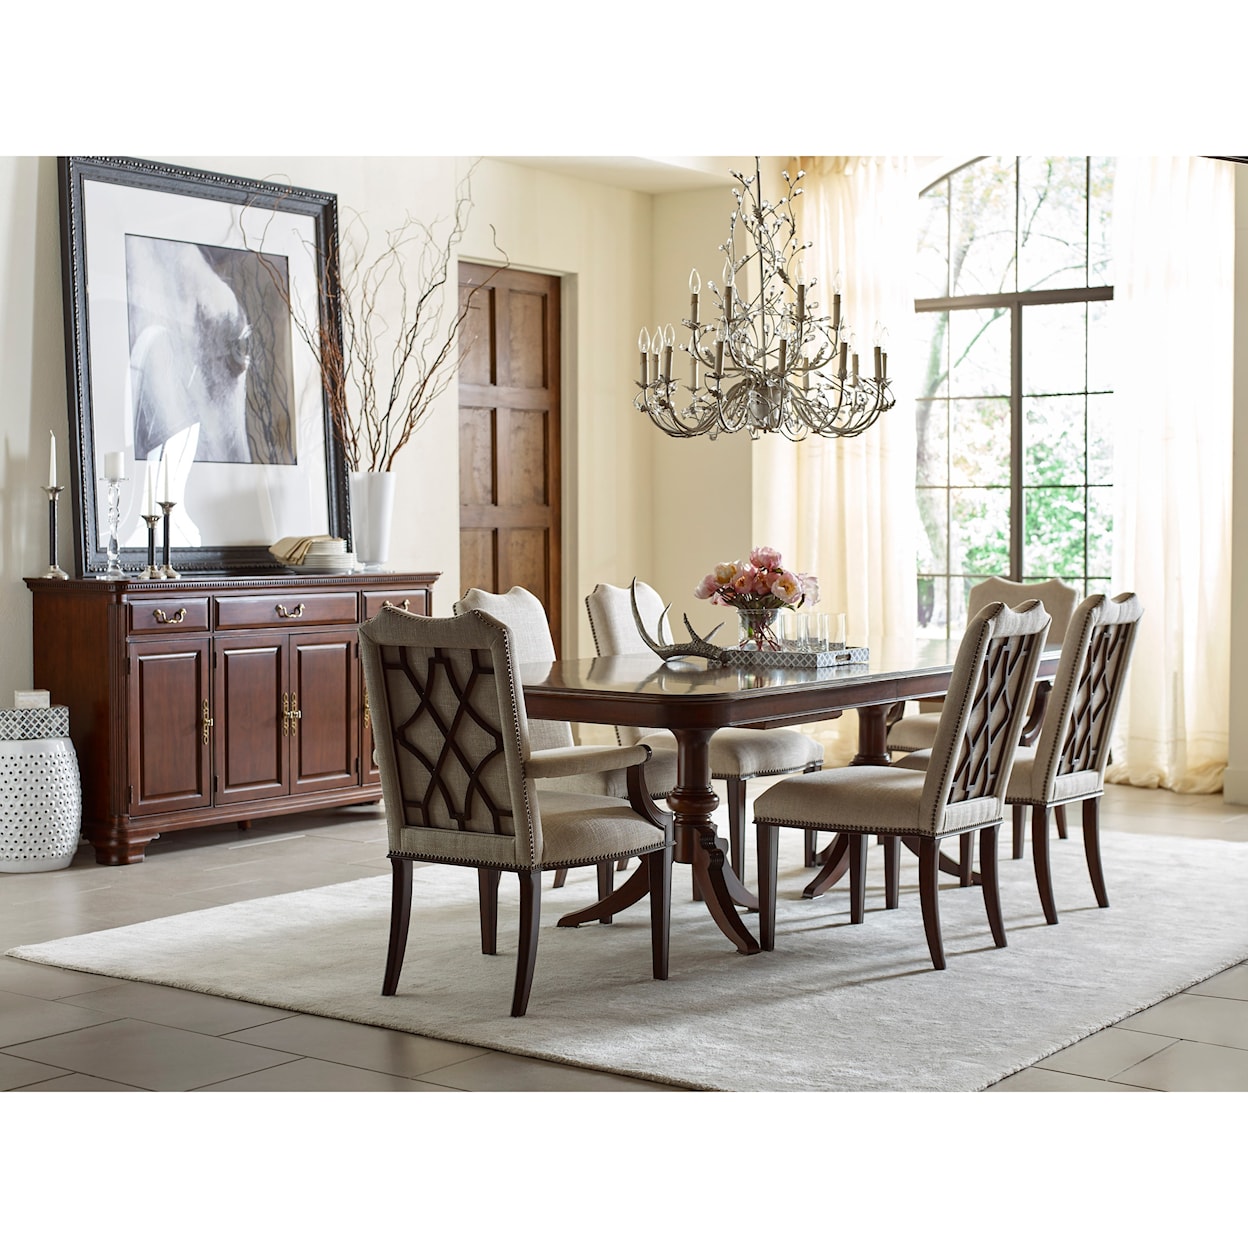 Kincaid Furniture Hadleigh Double Pedestal Dining Table - Complete